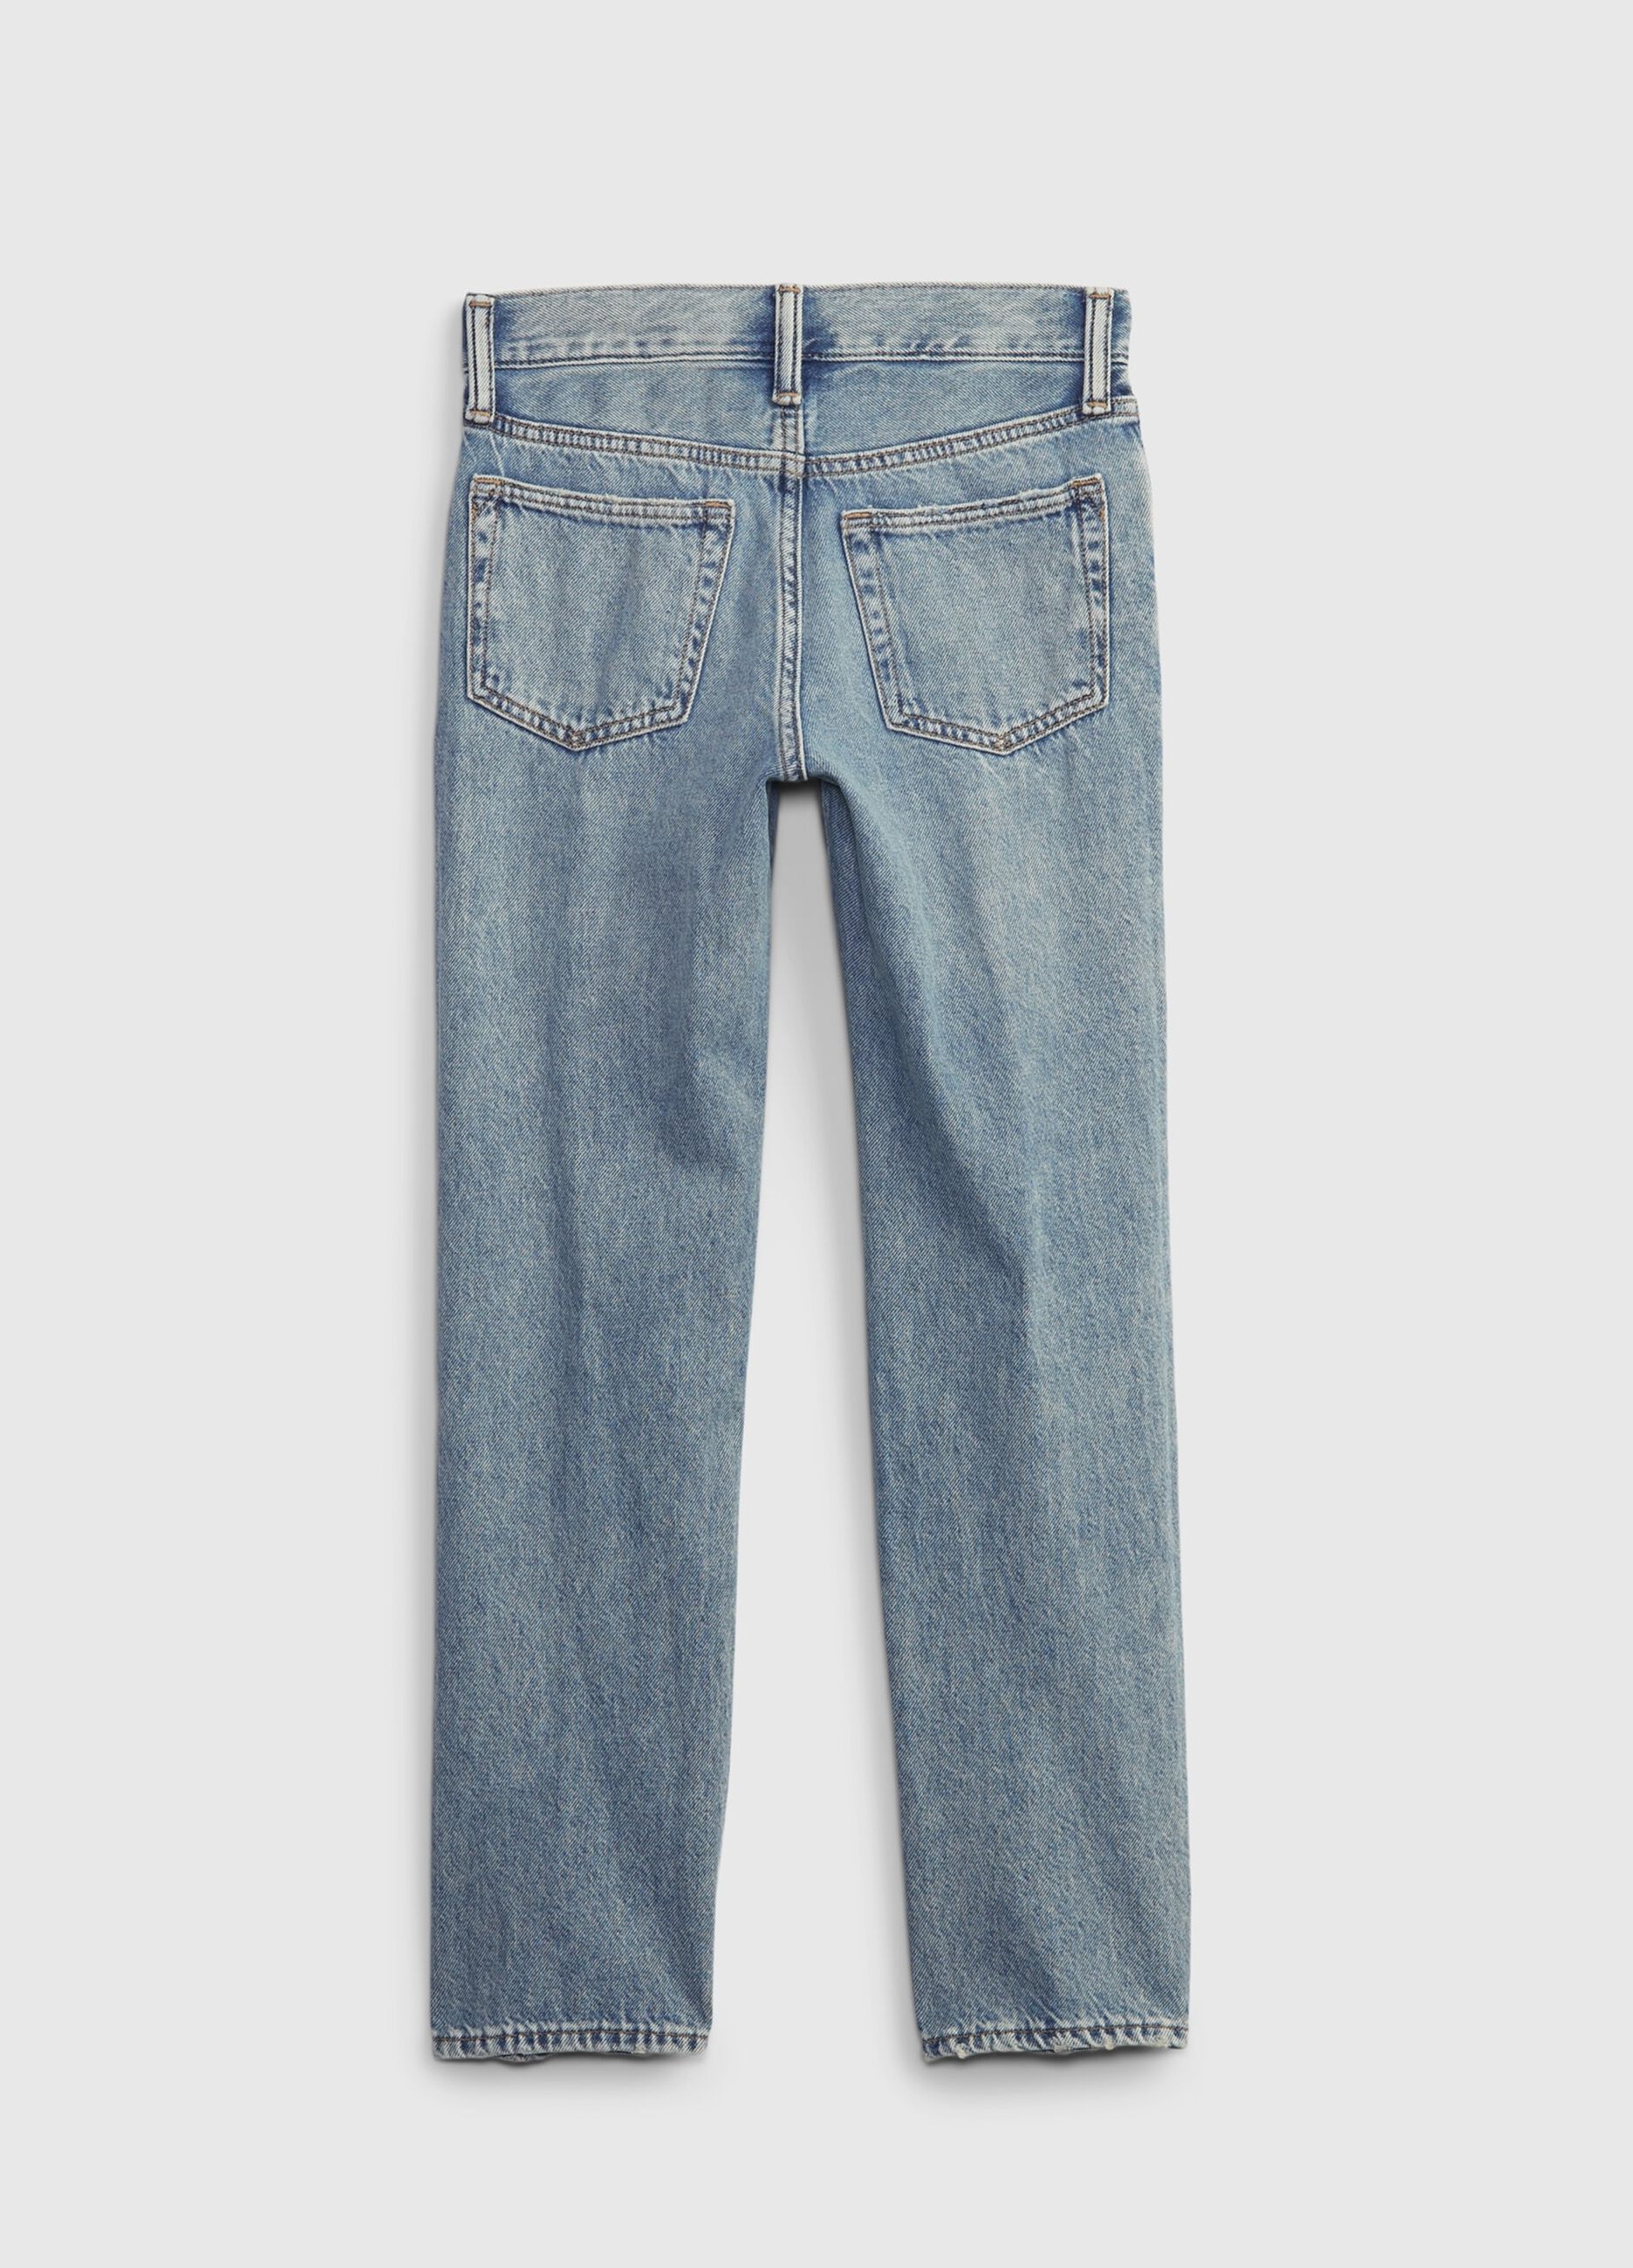 Five-pocket jeans with abrasions